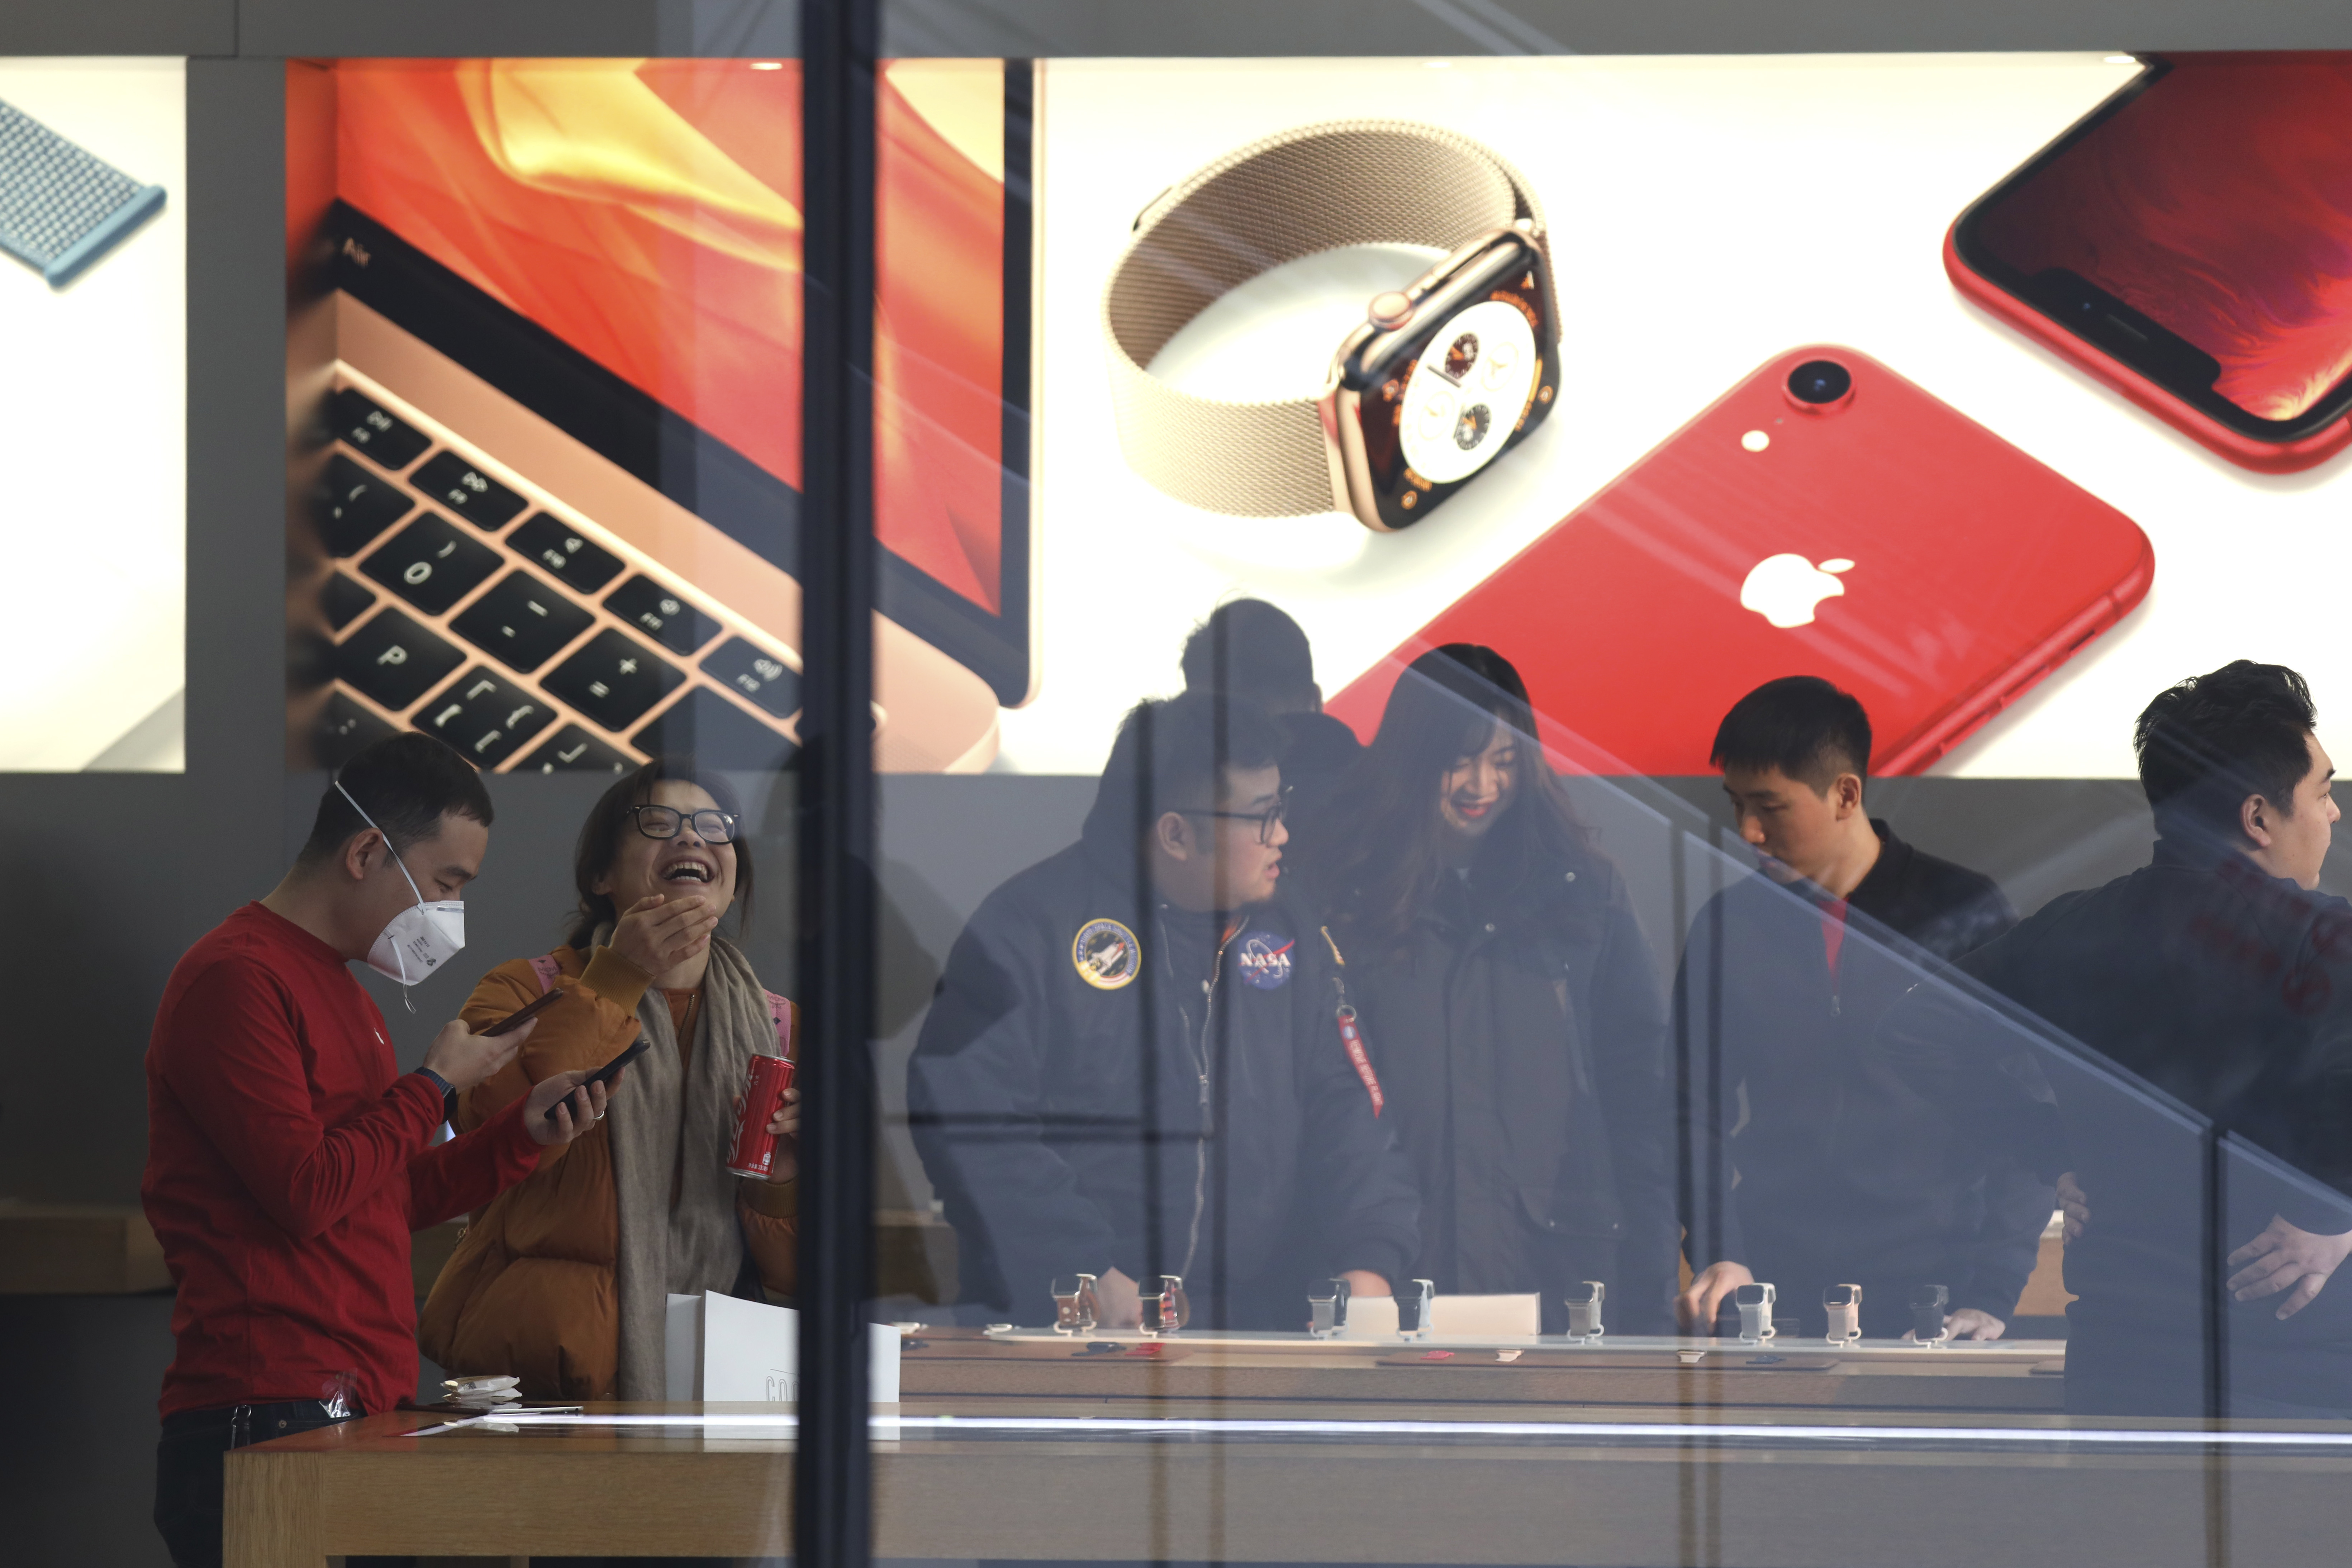 jammer kit online auction , Waning iPhone Demand Highlights Chinese Consumer Anxiety